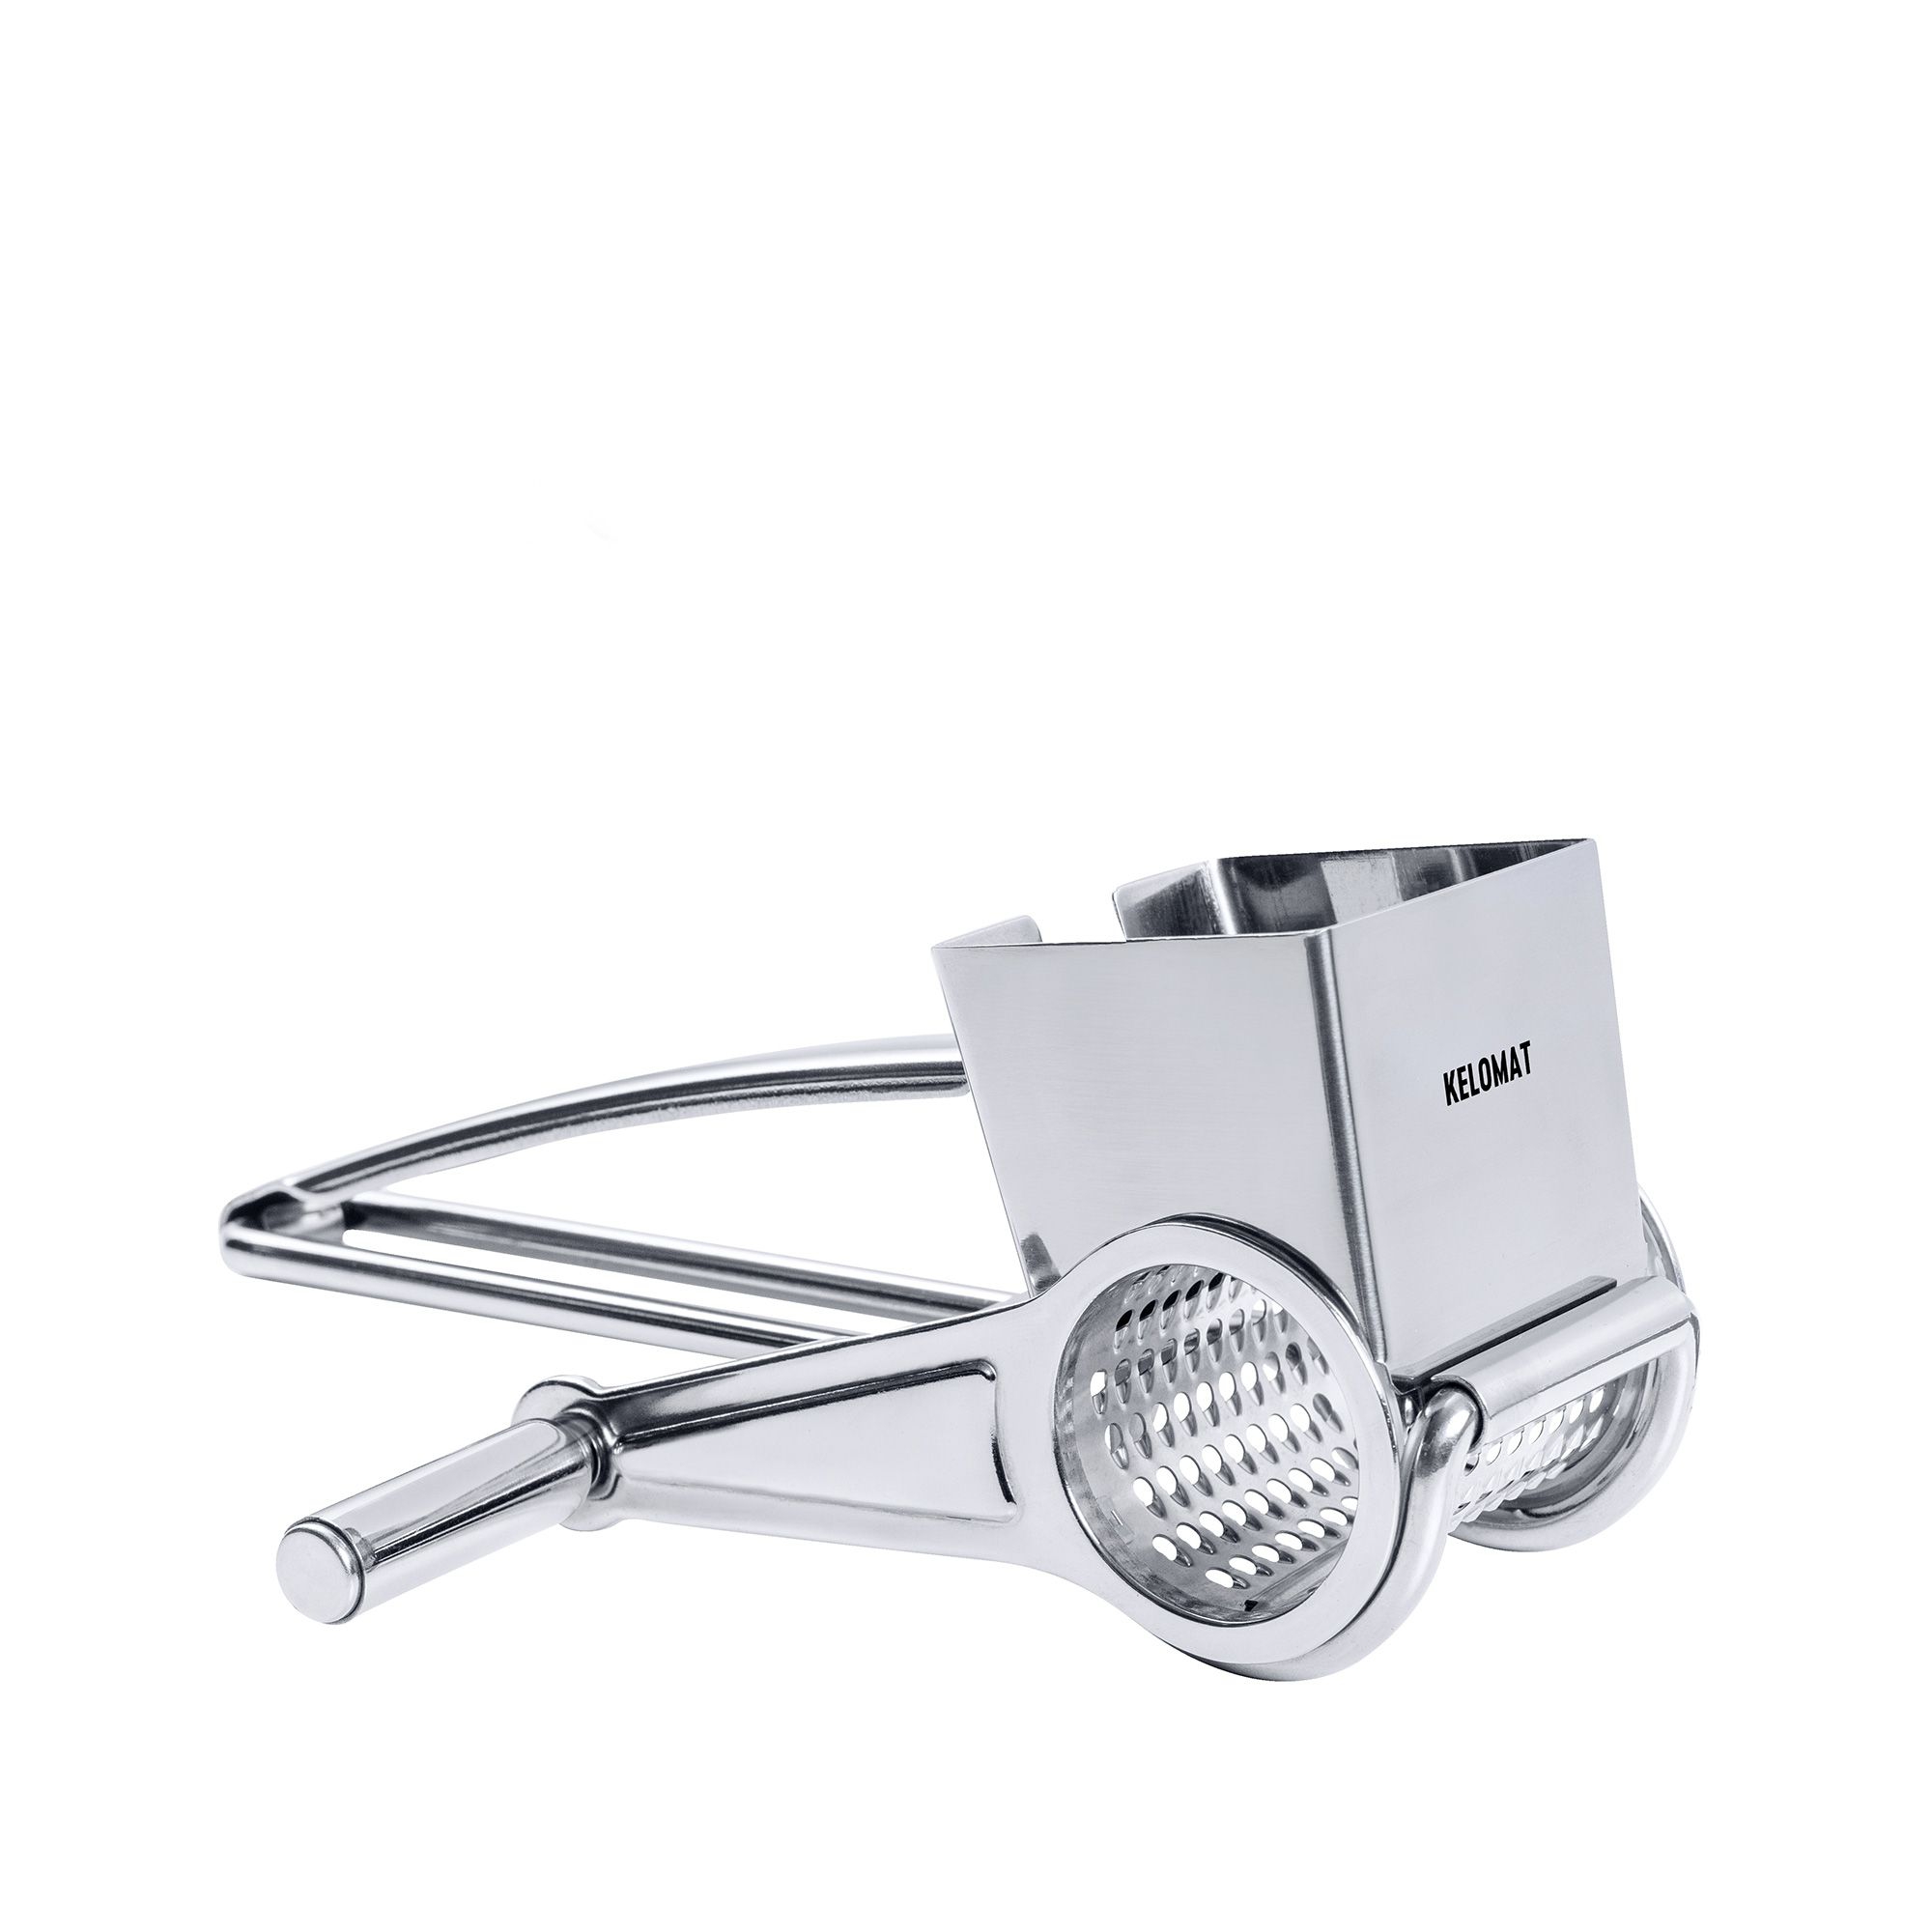 Kelomat - cheese grater stainless steel